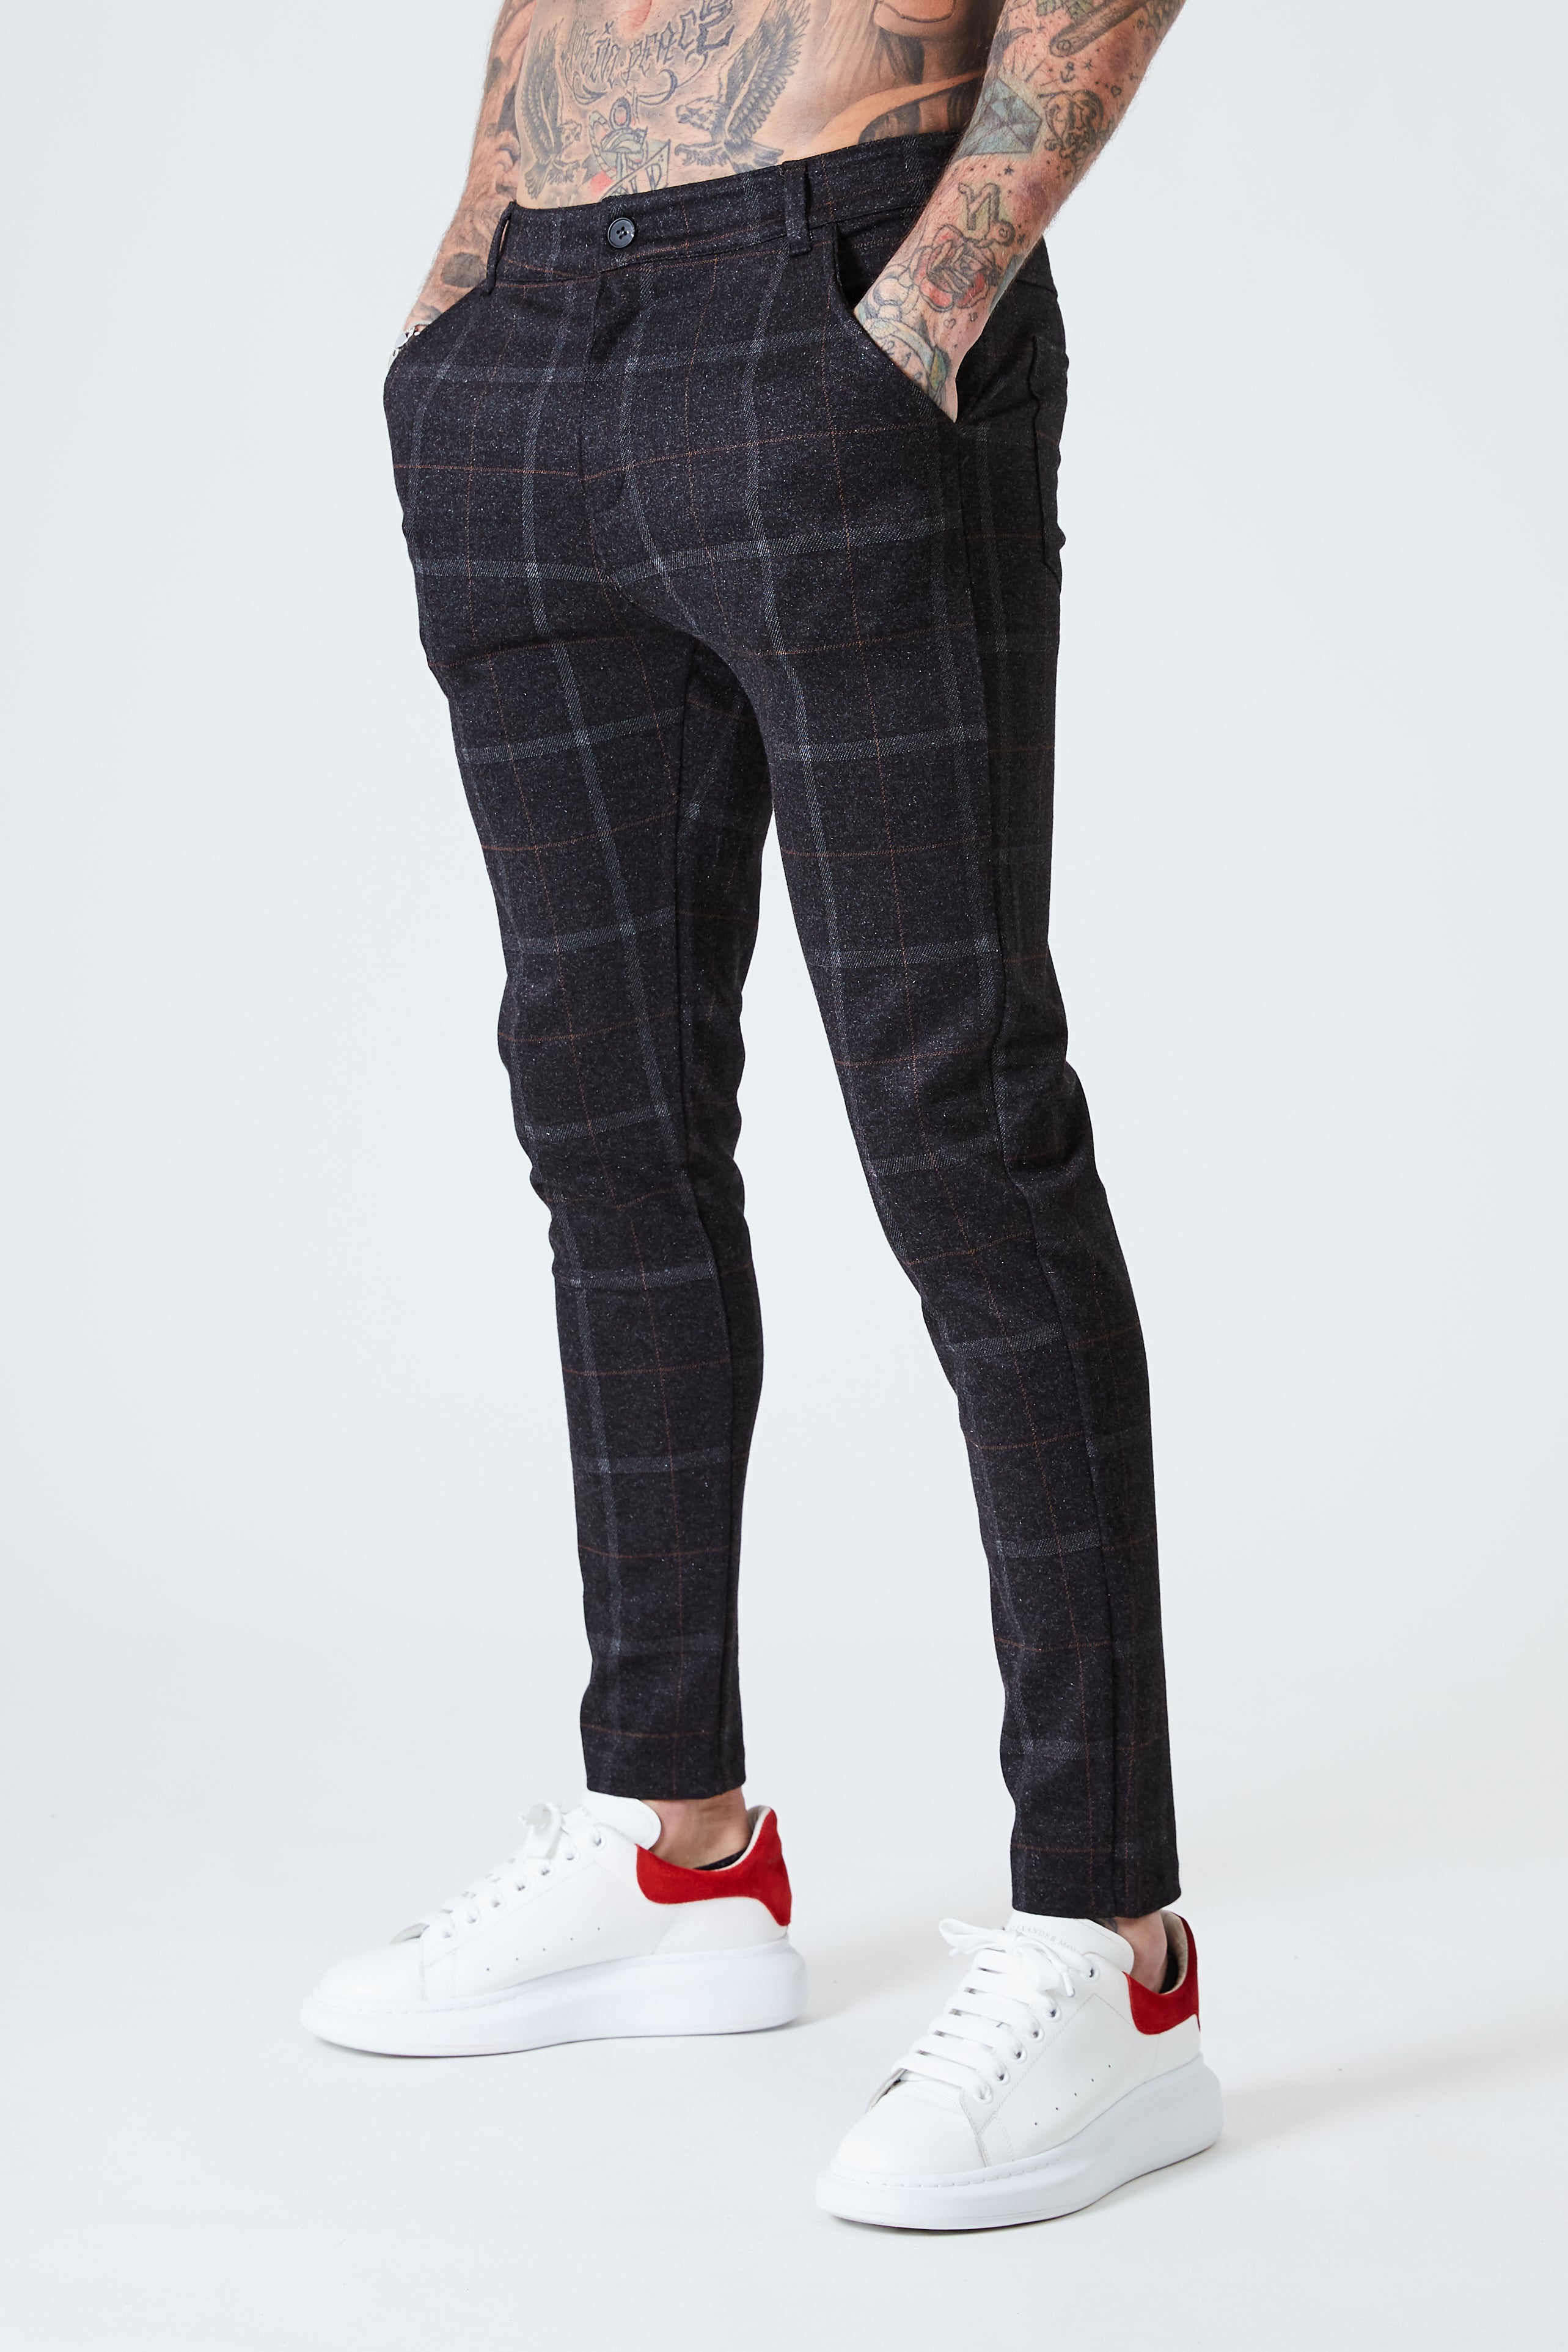 Luxe Check Trousers - Black - SVPPLY. STUDIOS 